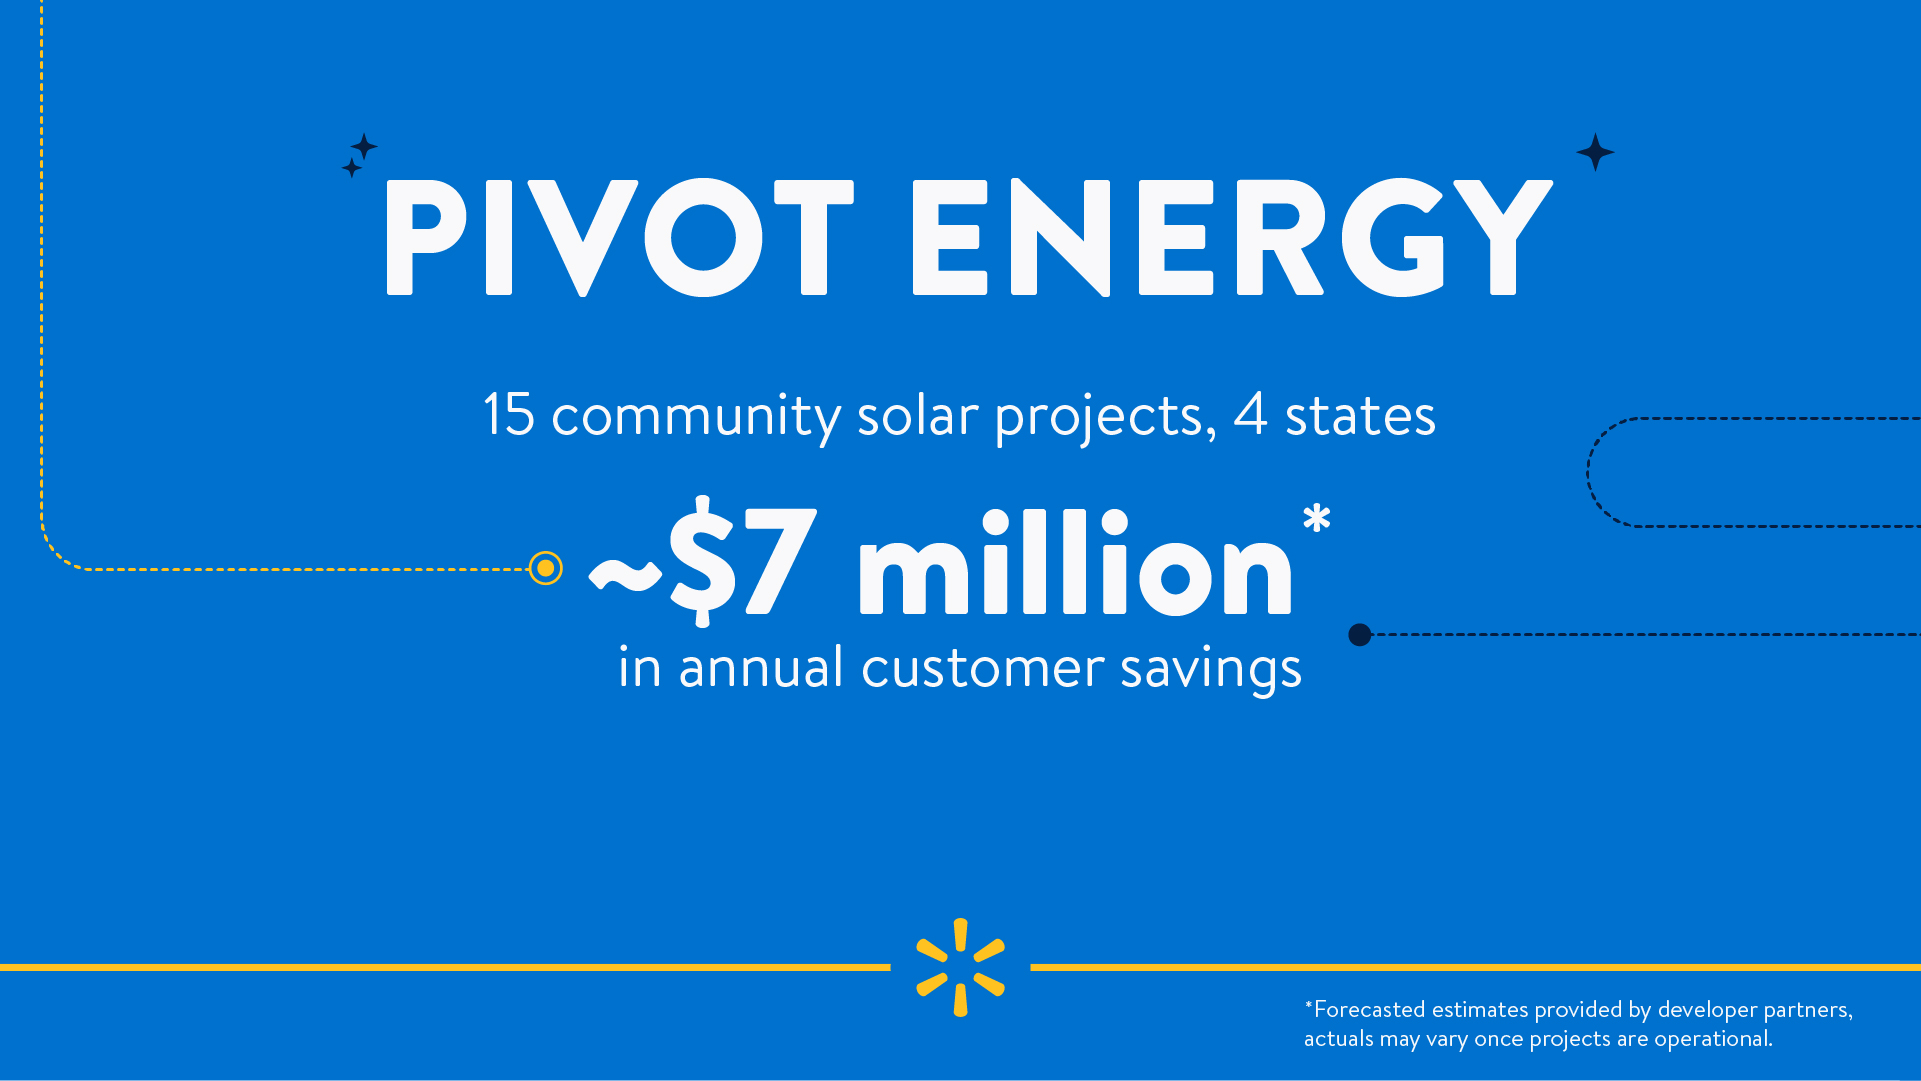 Image reads "Pivot Energy. 15 community solar projects, 5 states. Approximately $7 million* in annual customer savings. *Forecasted estimates provided by developer partners, actuals may very once projects are operational."